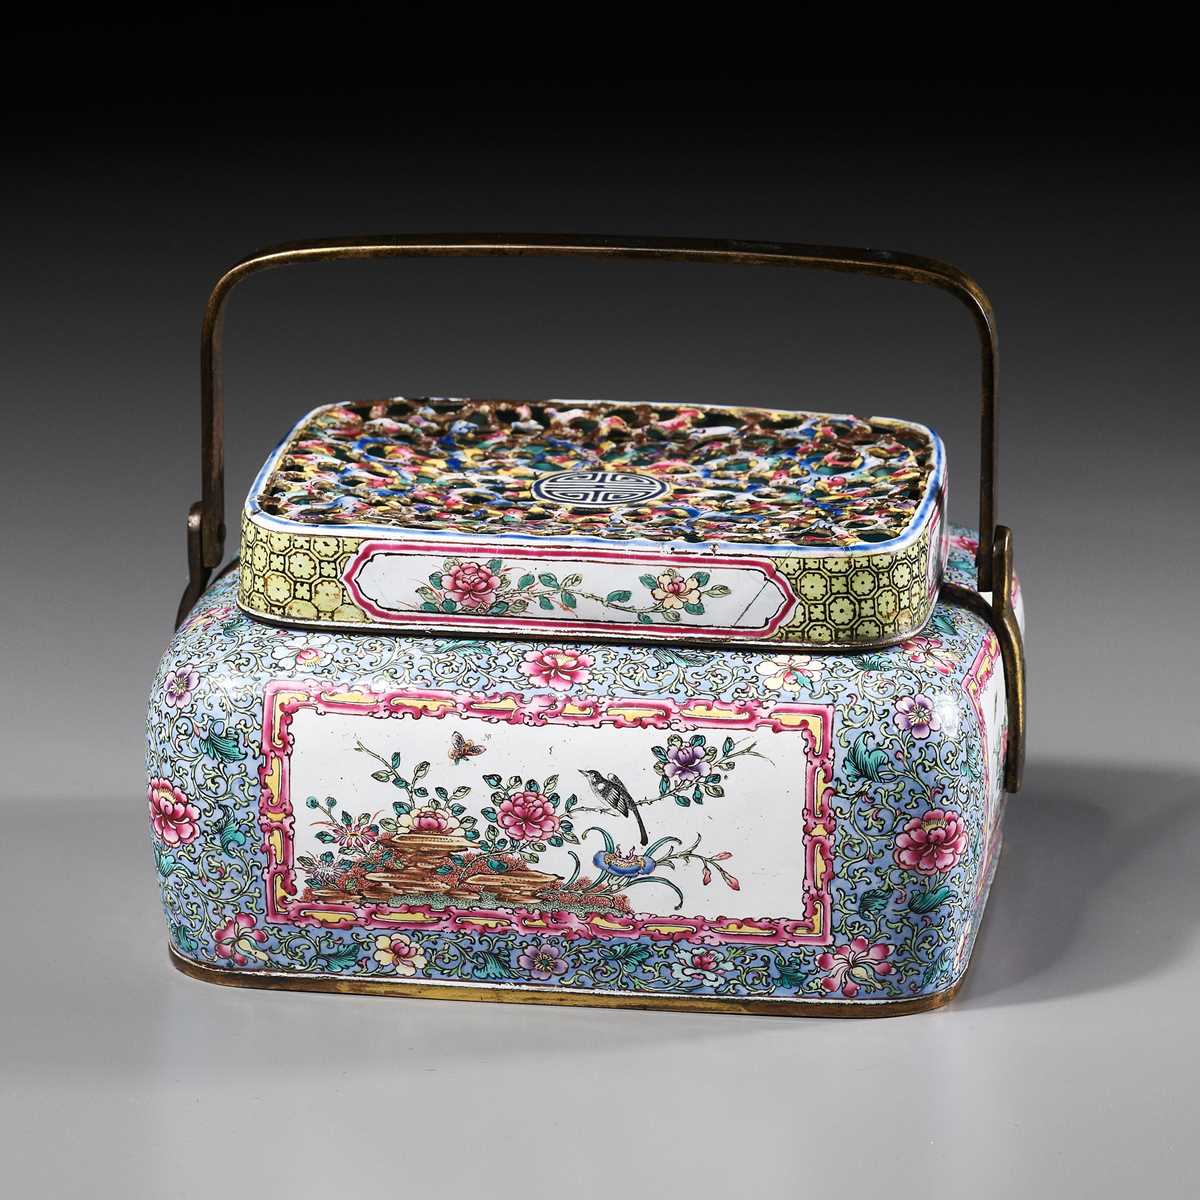 Lot 5 - AN EXCEEDINGLY RARE IMPERIAL ENAMELED COPPER HANDWARMER, QIANLONG MARK AND PERIOD